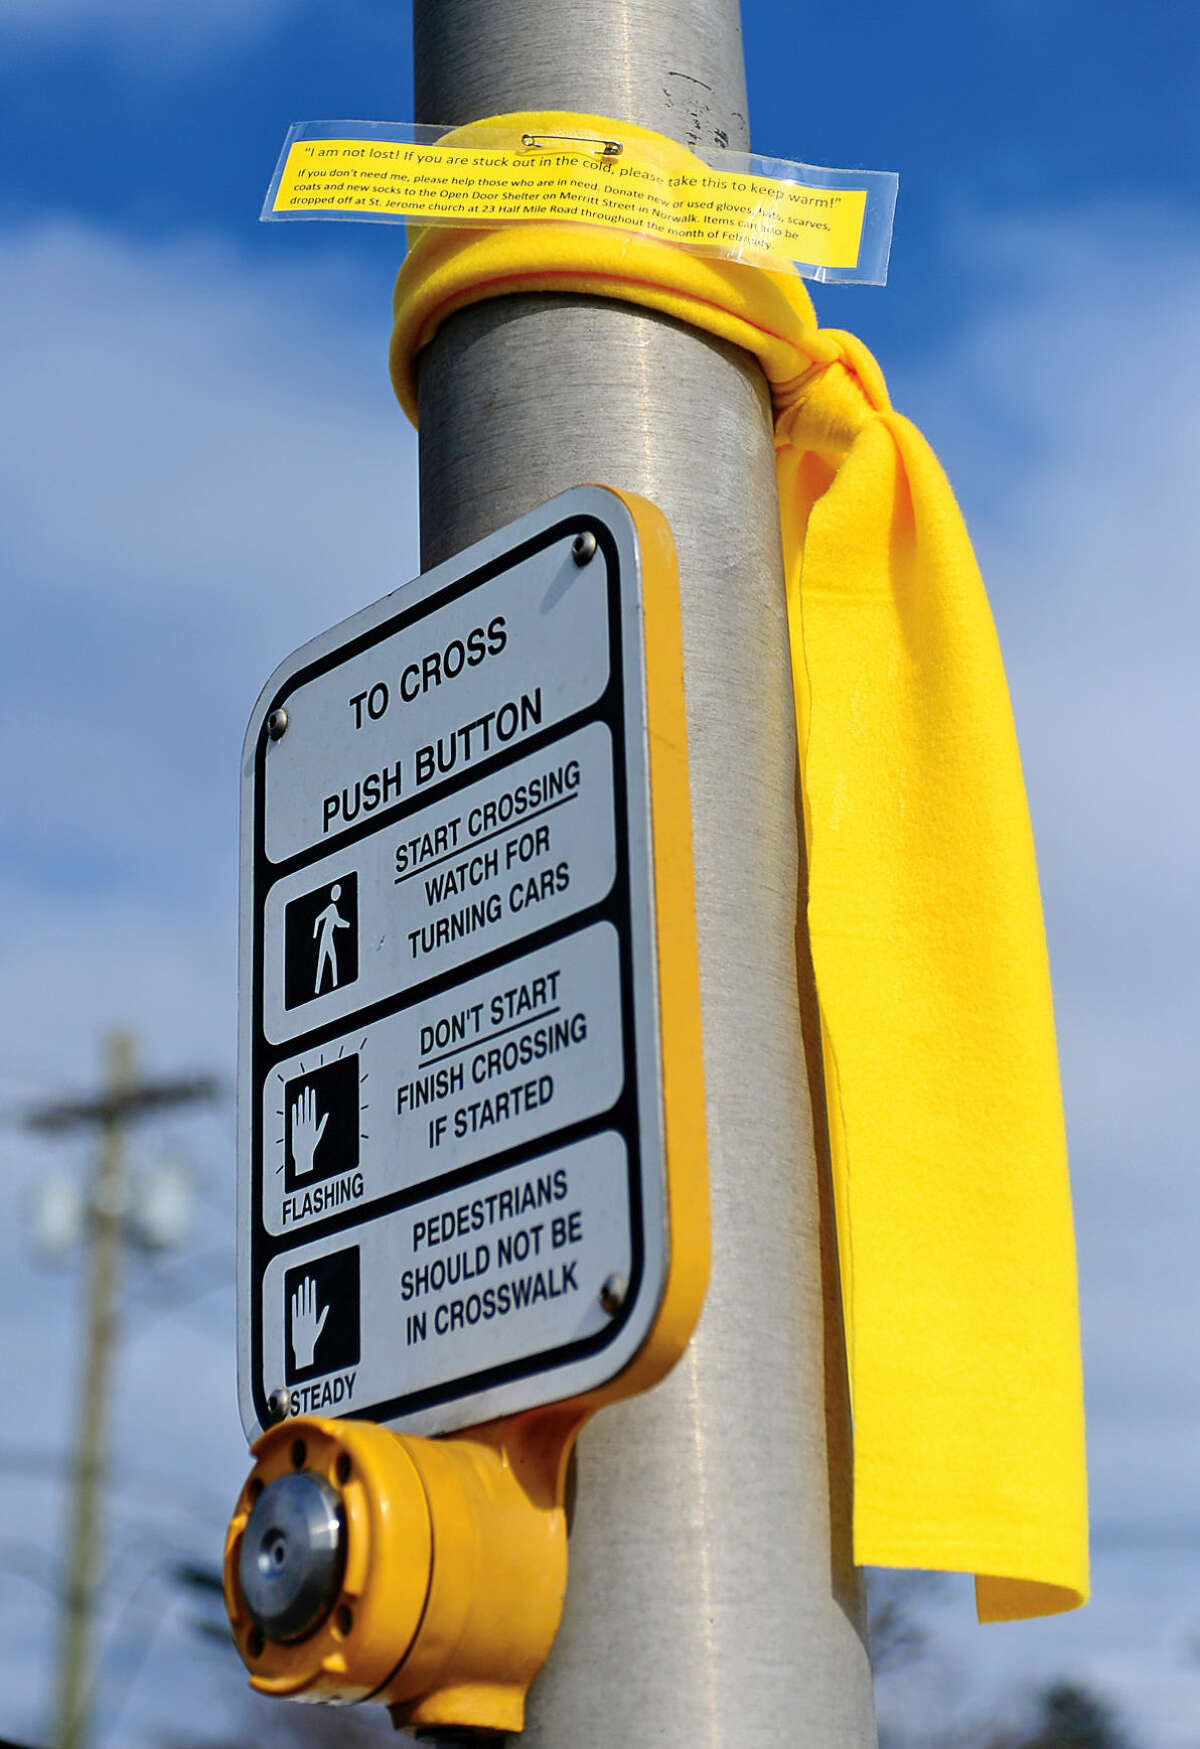 Hour photo / Erik Trautmann A scarve is tied on a pole on East Ave in Norwalk with an note offering it to those who may need it. The St Jerome Youth Group tied the scarves around the city in an effort to draw attention to homelessness in Norwalk.